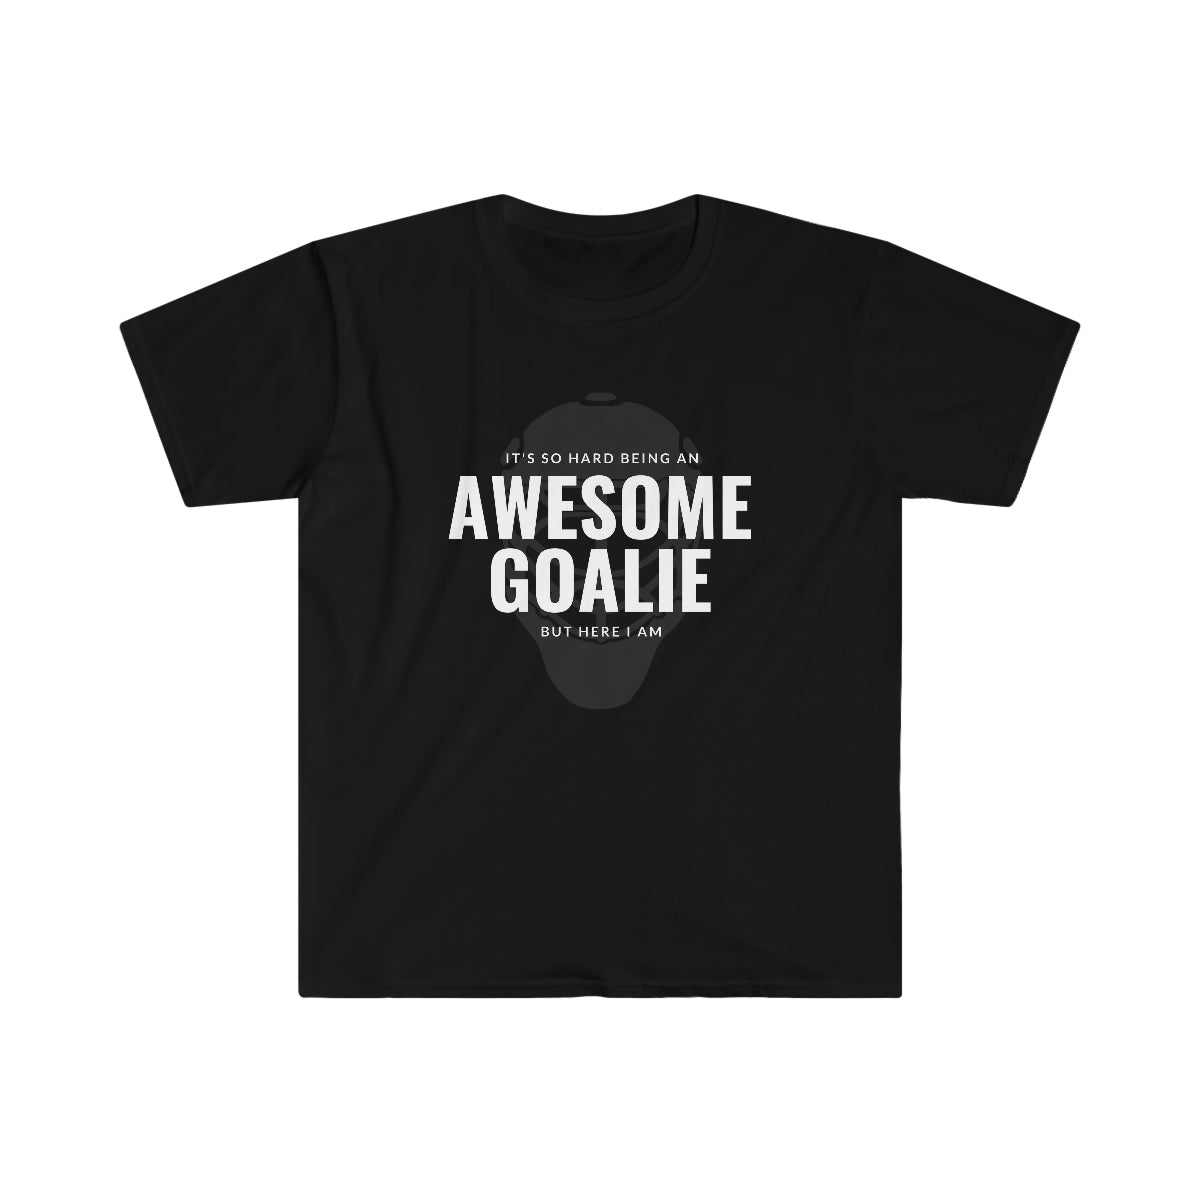 It's hard being an AWESOME GOALIE, but here I am - Men's Tee